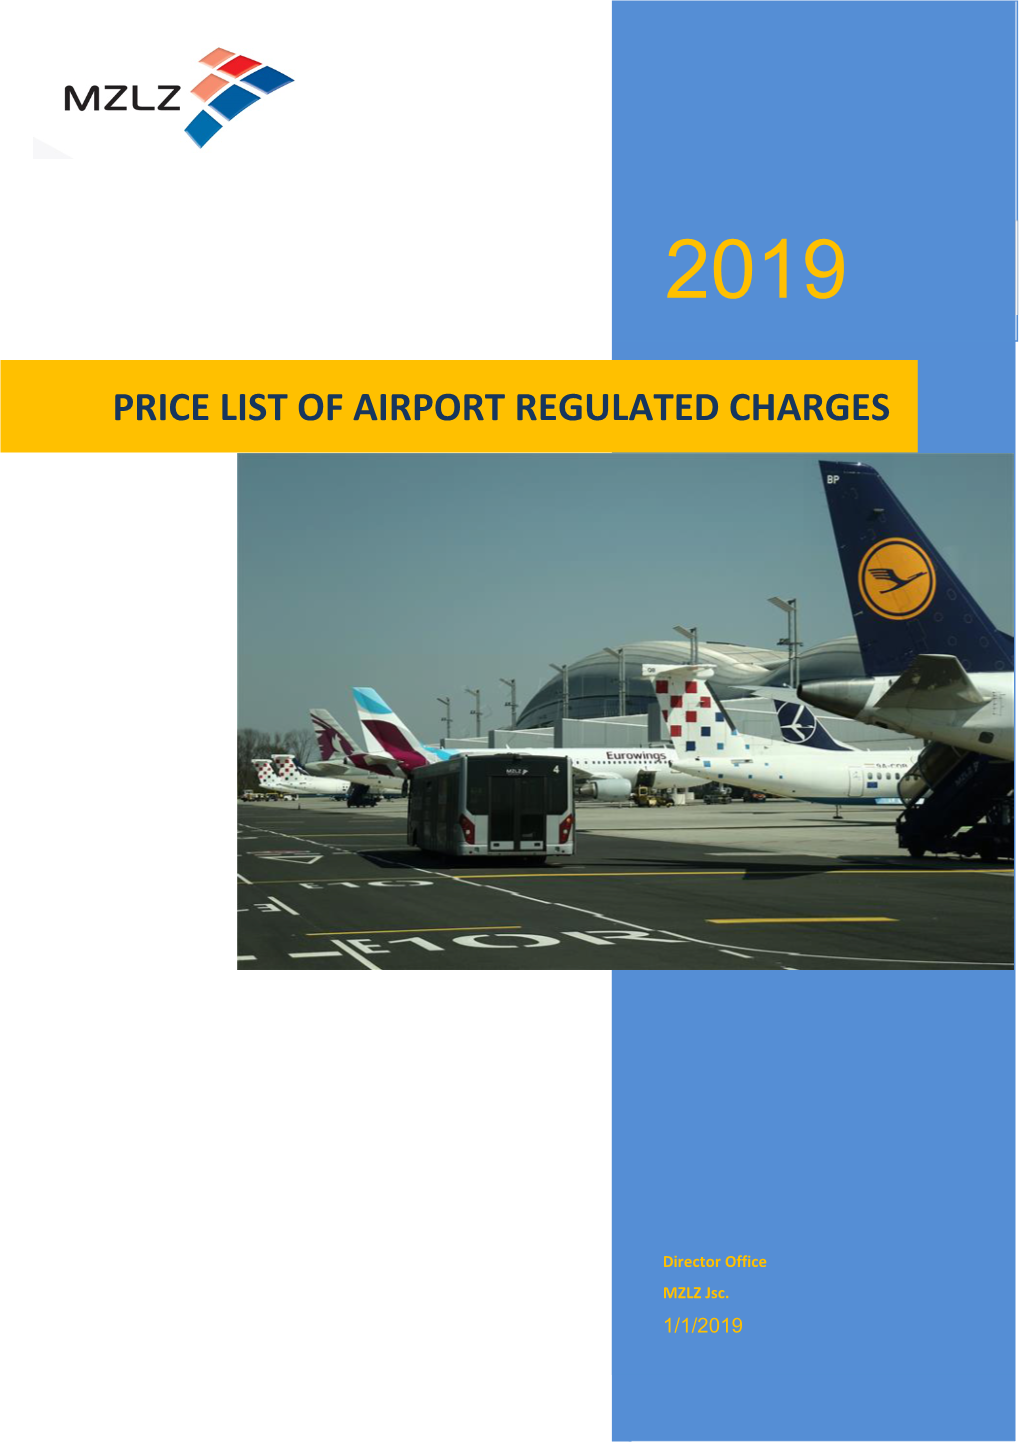 Price List of Airport Regulated Charges